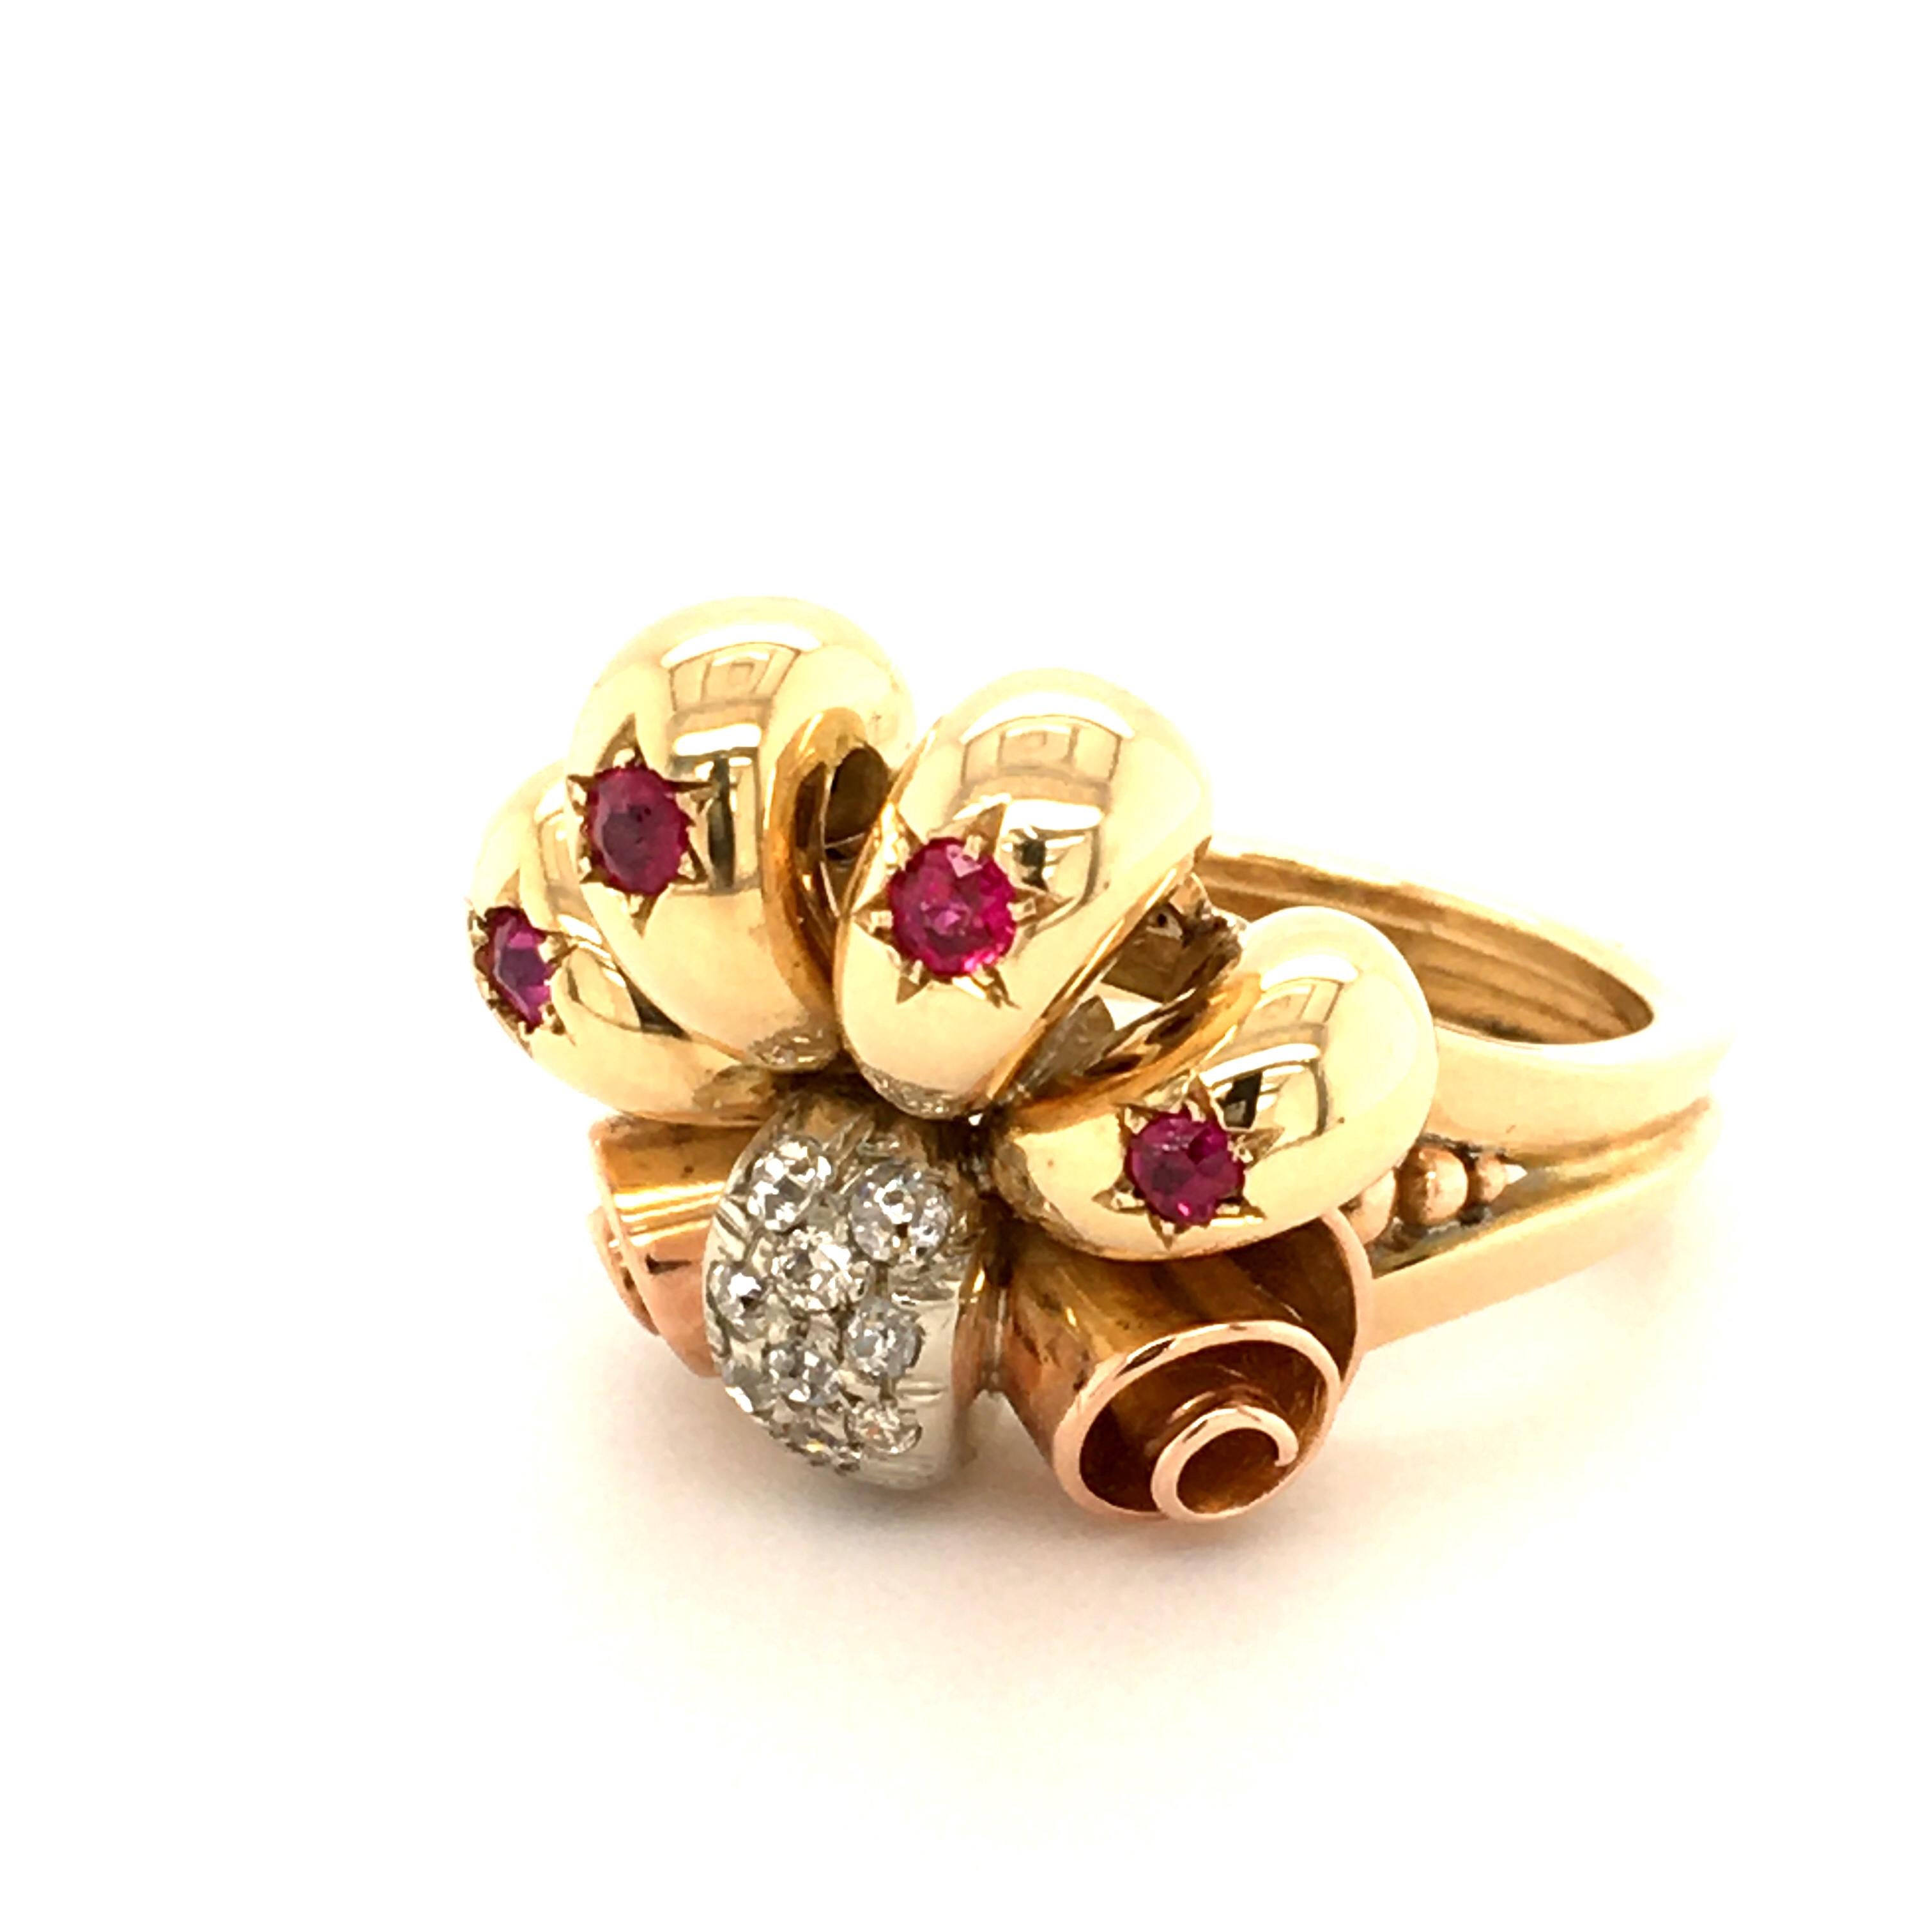 Retro Extraordinary Gold Ring with Rubys and Oldcut Diamonds